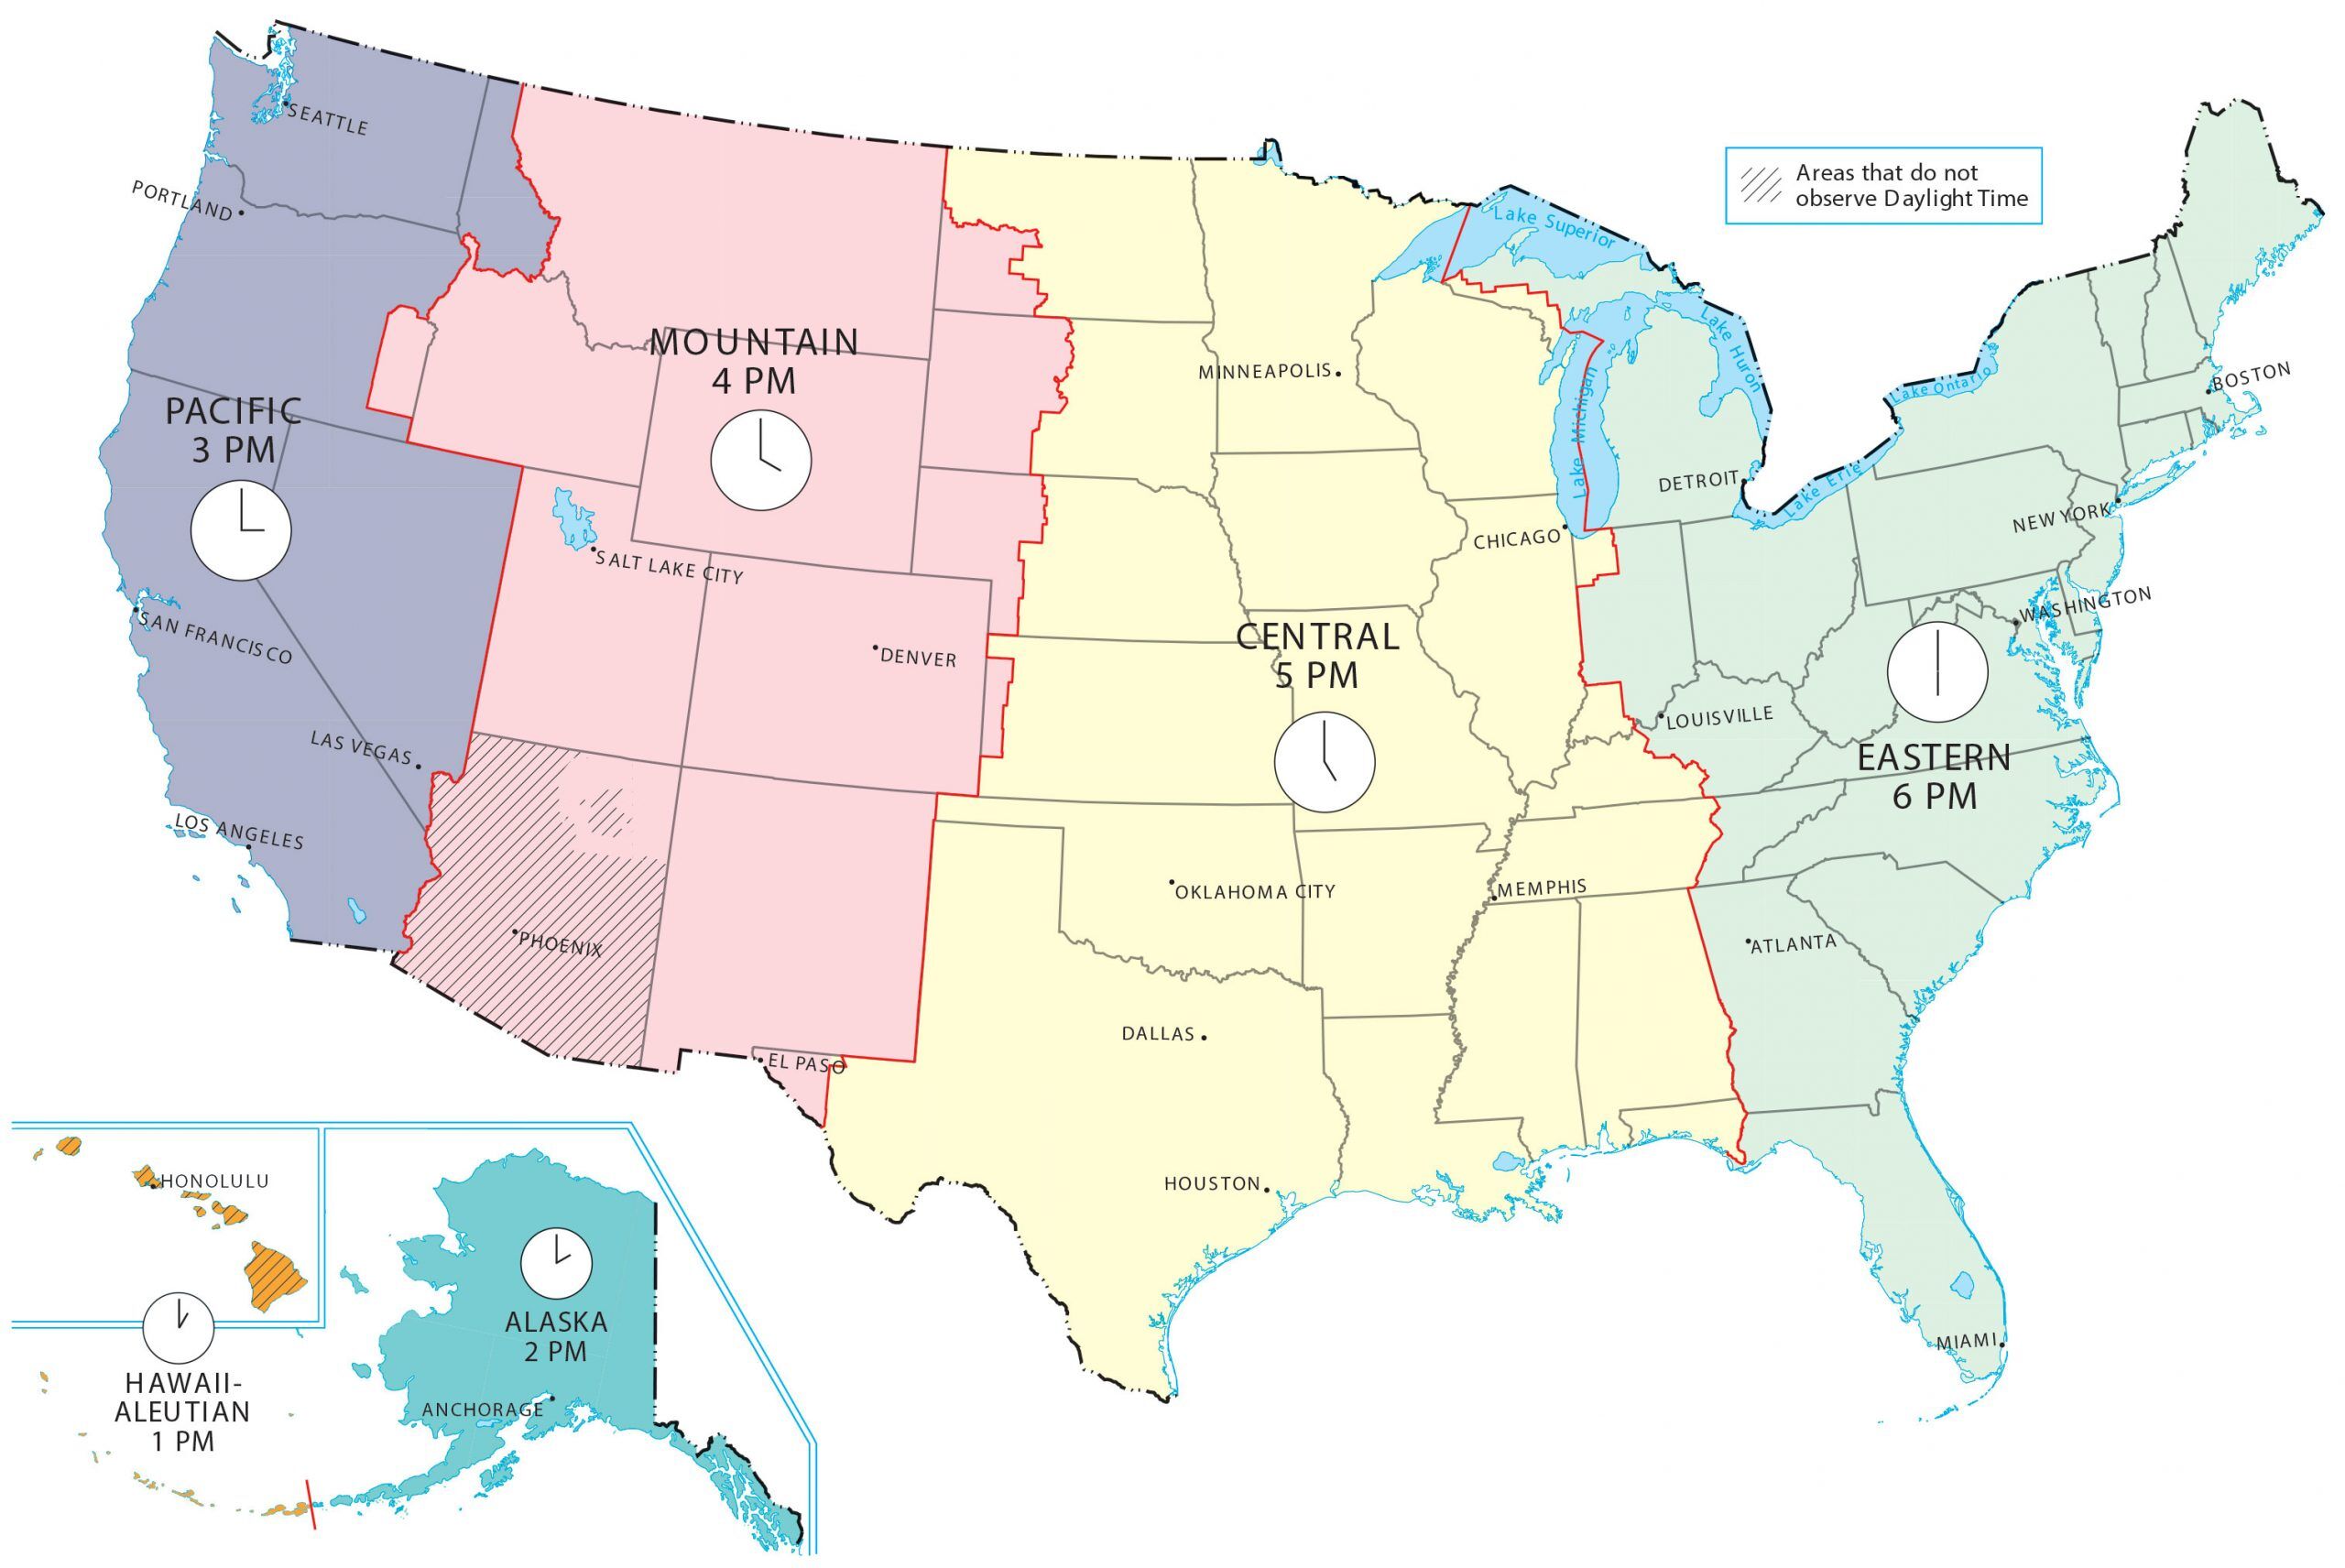 eastern time zone map